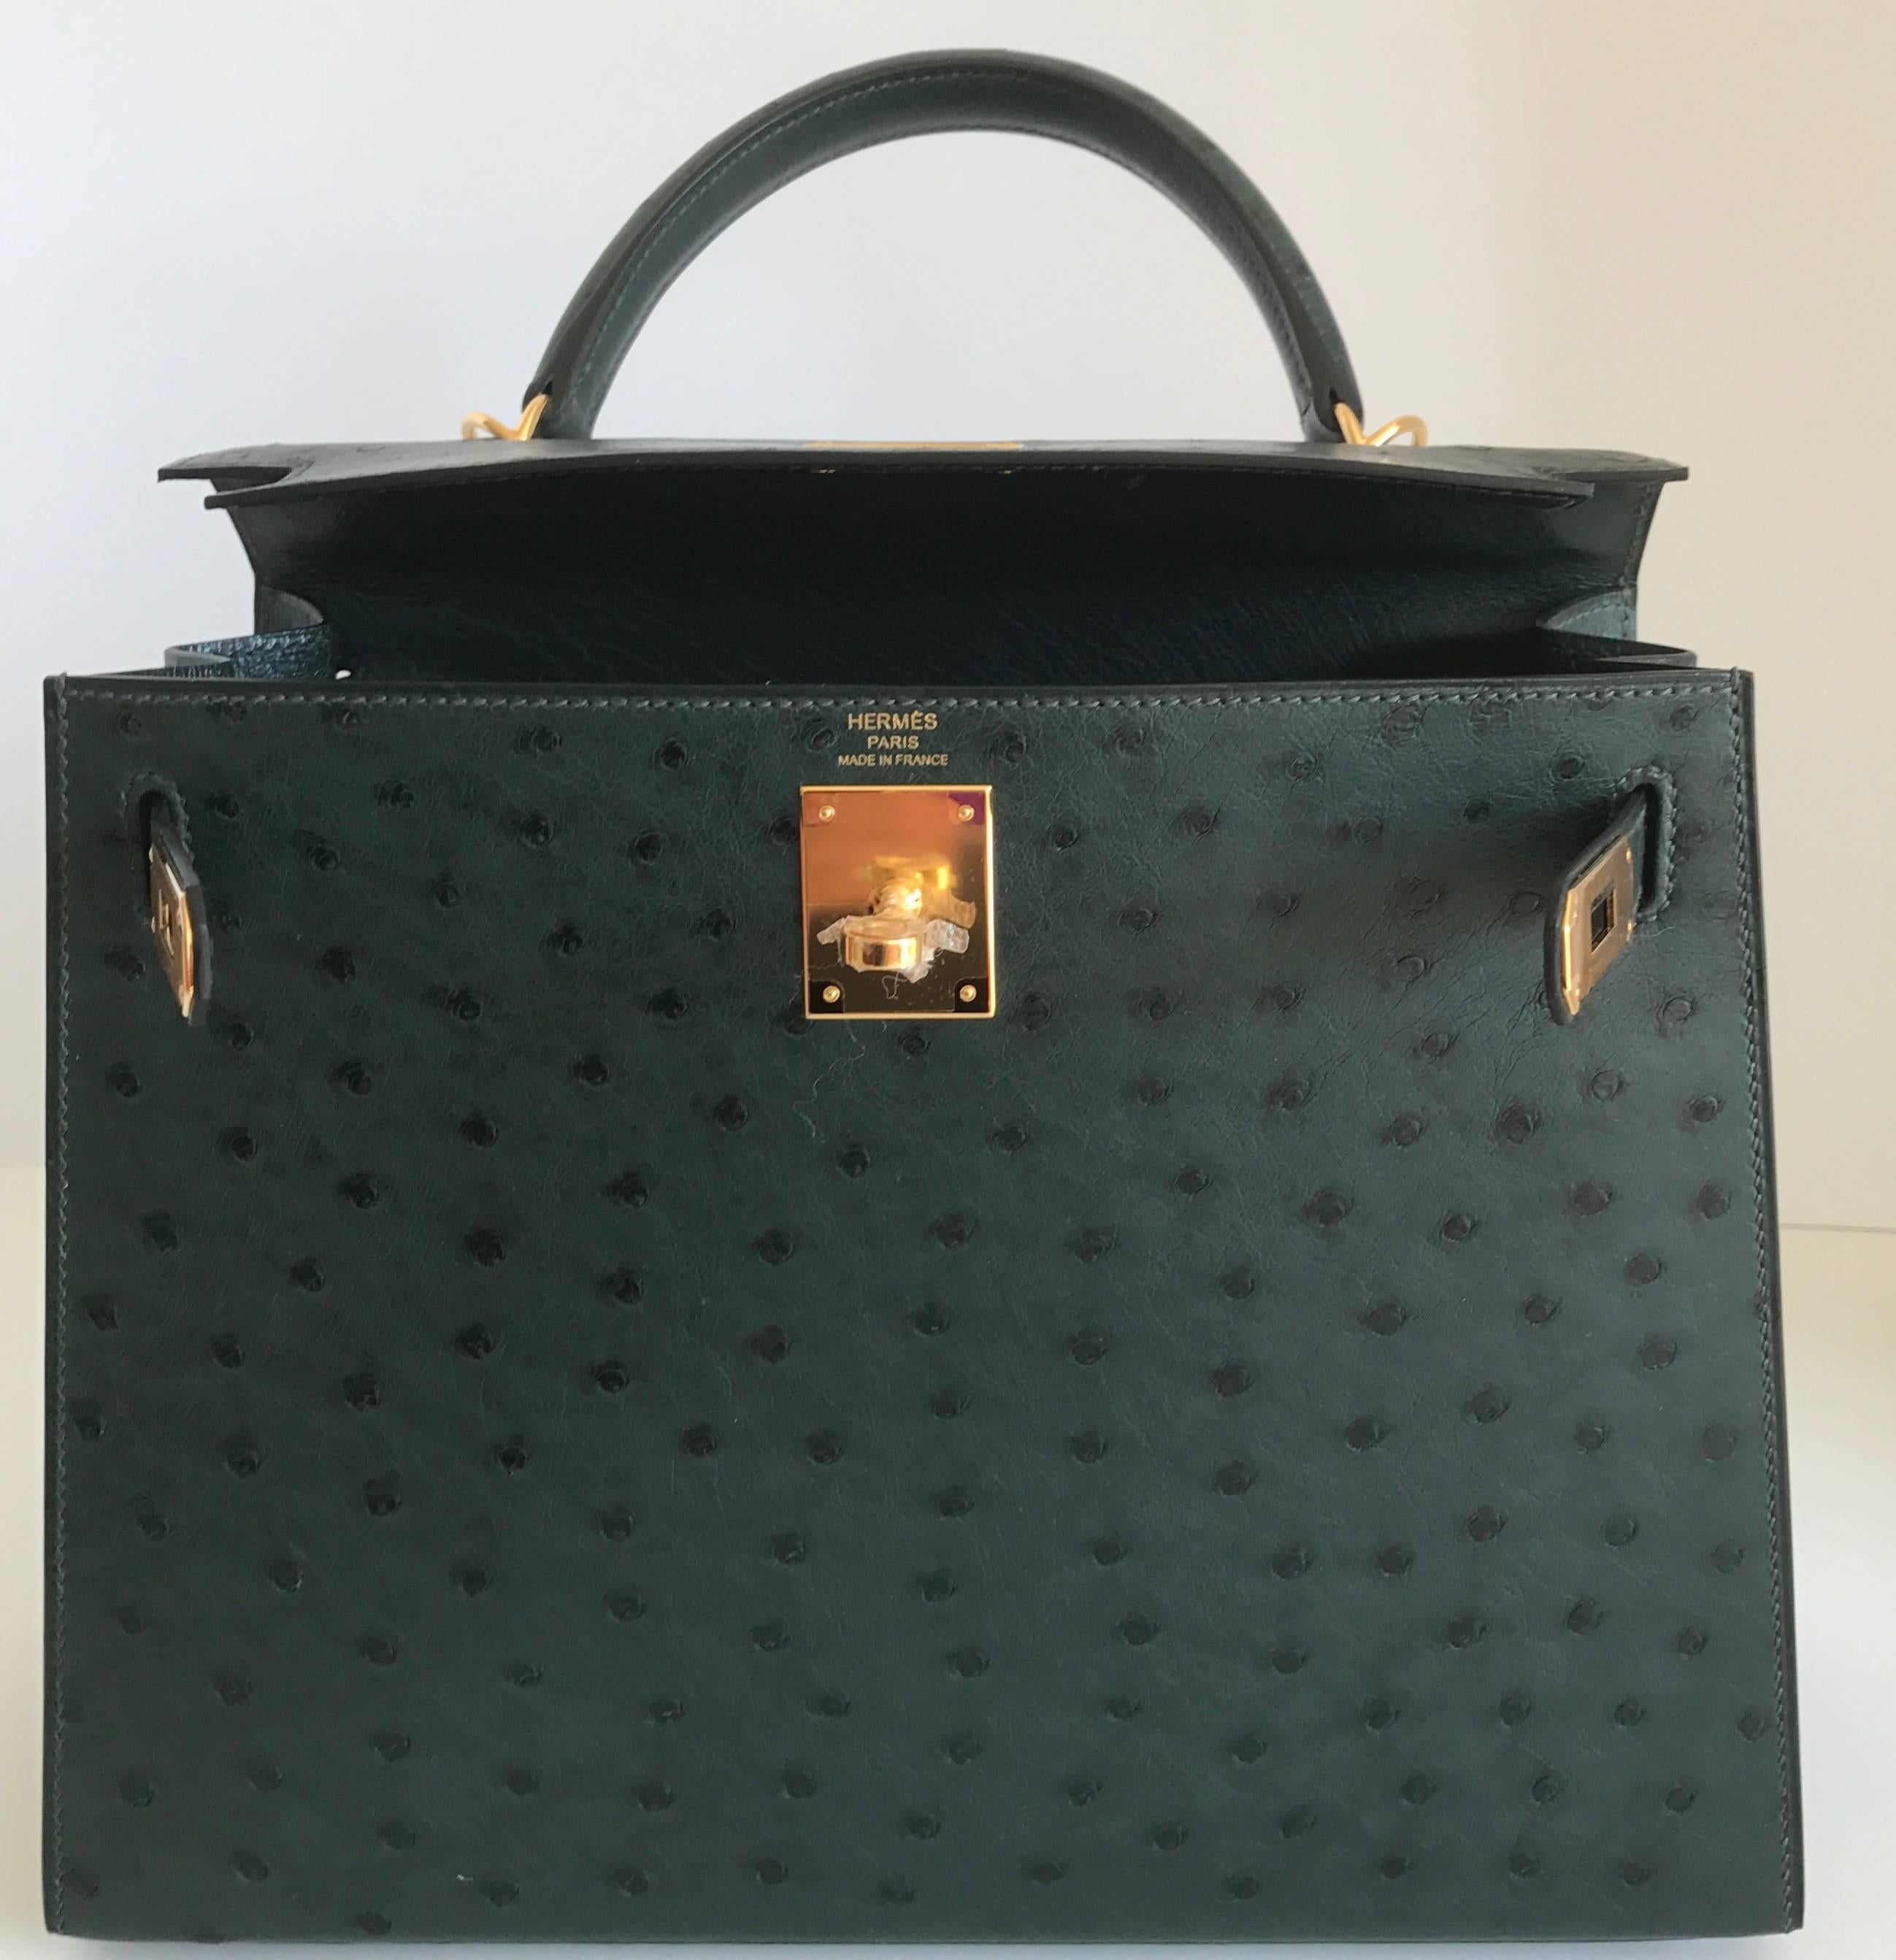 A Very Rare Bag!
Brand New Kelly Bag in Ostrich, Sellier,  with Gold Hardware in size 28cm
The color is called Vert Titan, a beautiful deep emerald green, set off with Gold Hardware ..The bag is to die for!  
Its hard enough to find a Kelly 28 in